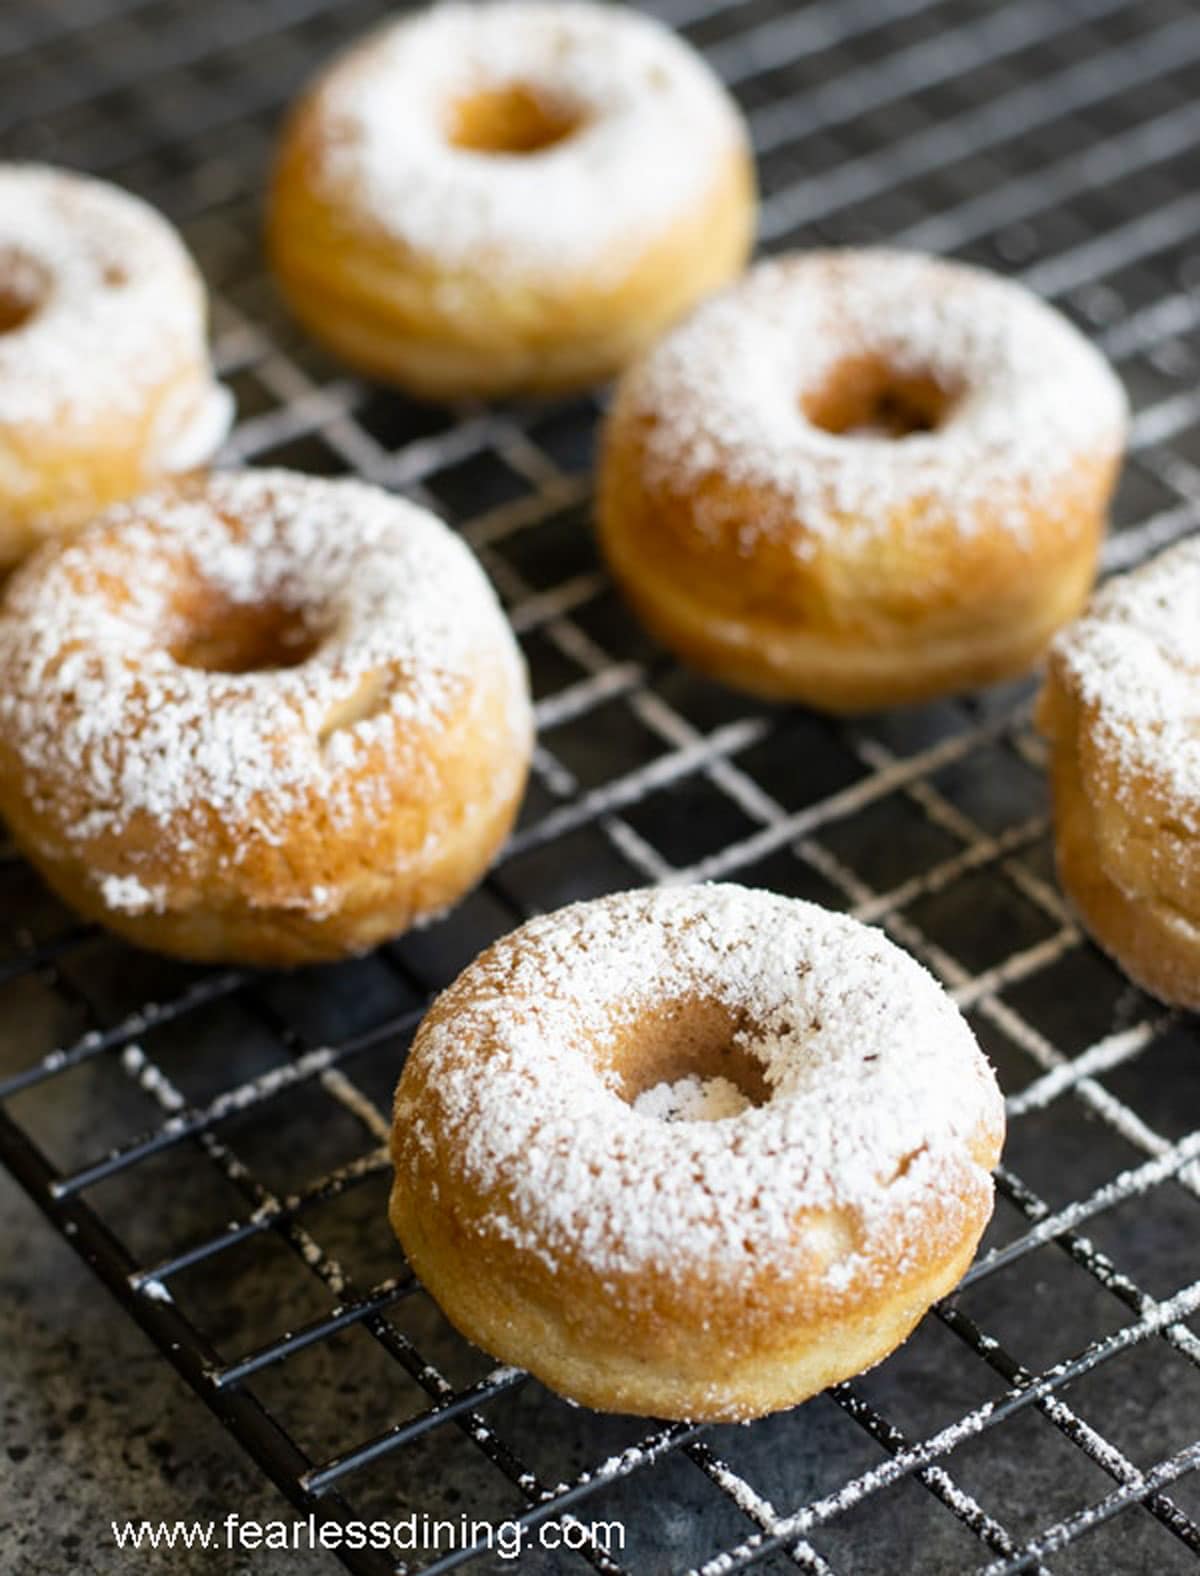 A rack of egg-free donuts with powdered sugar dusted over them.